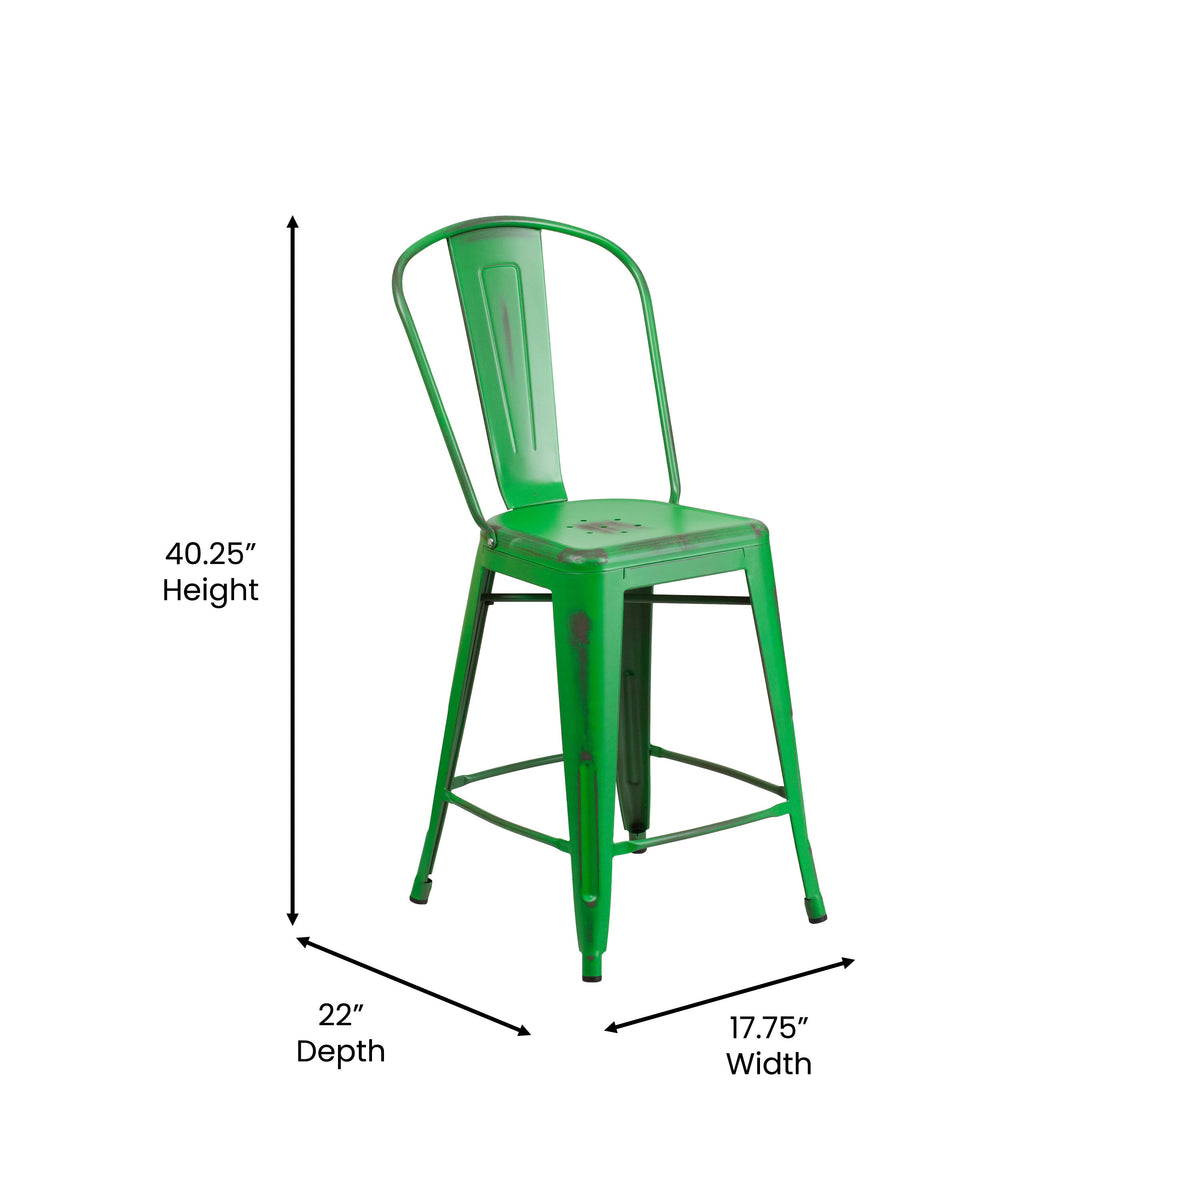 Green/Teak |#| All-Weather Counter Height Stool with Poly Resin Seat - Green/Teak